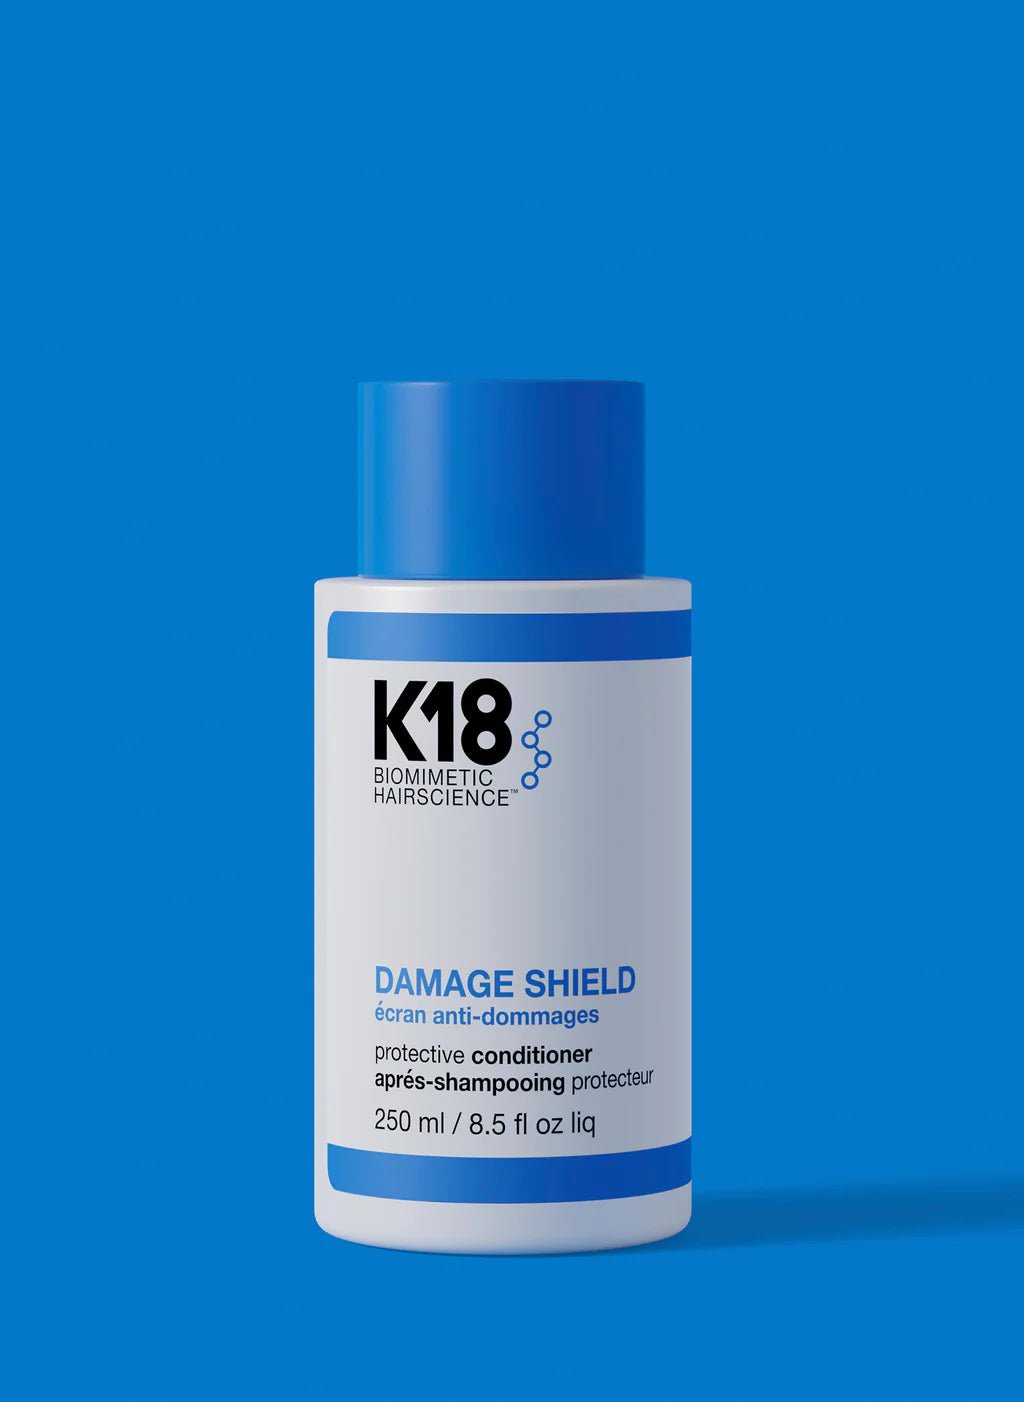 A bottle of K18 Damage Shield pH Protective Conditioner by K18 Hair Repair, a nourishing conditioner for hair health with blue and white labeling against a blue background. The bottle is 250 ml (8.5 fl oz).